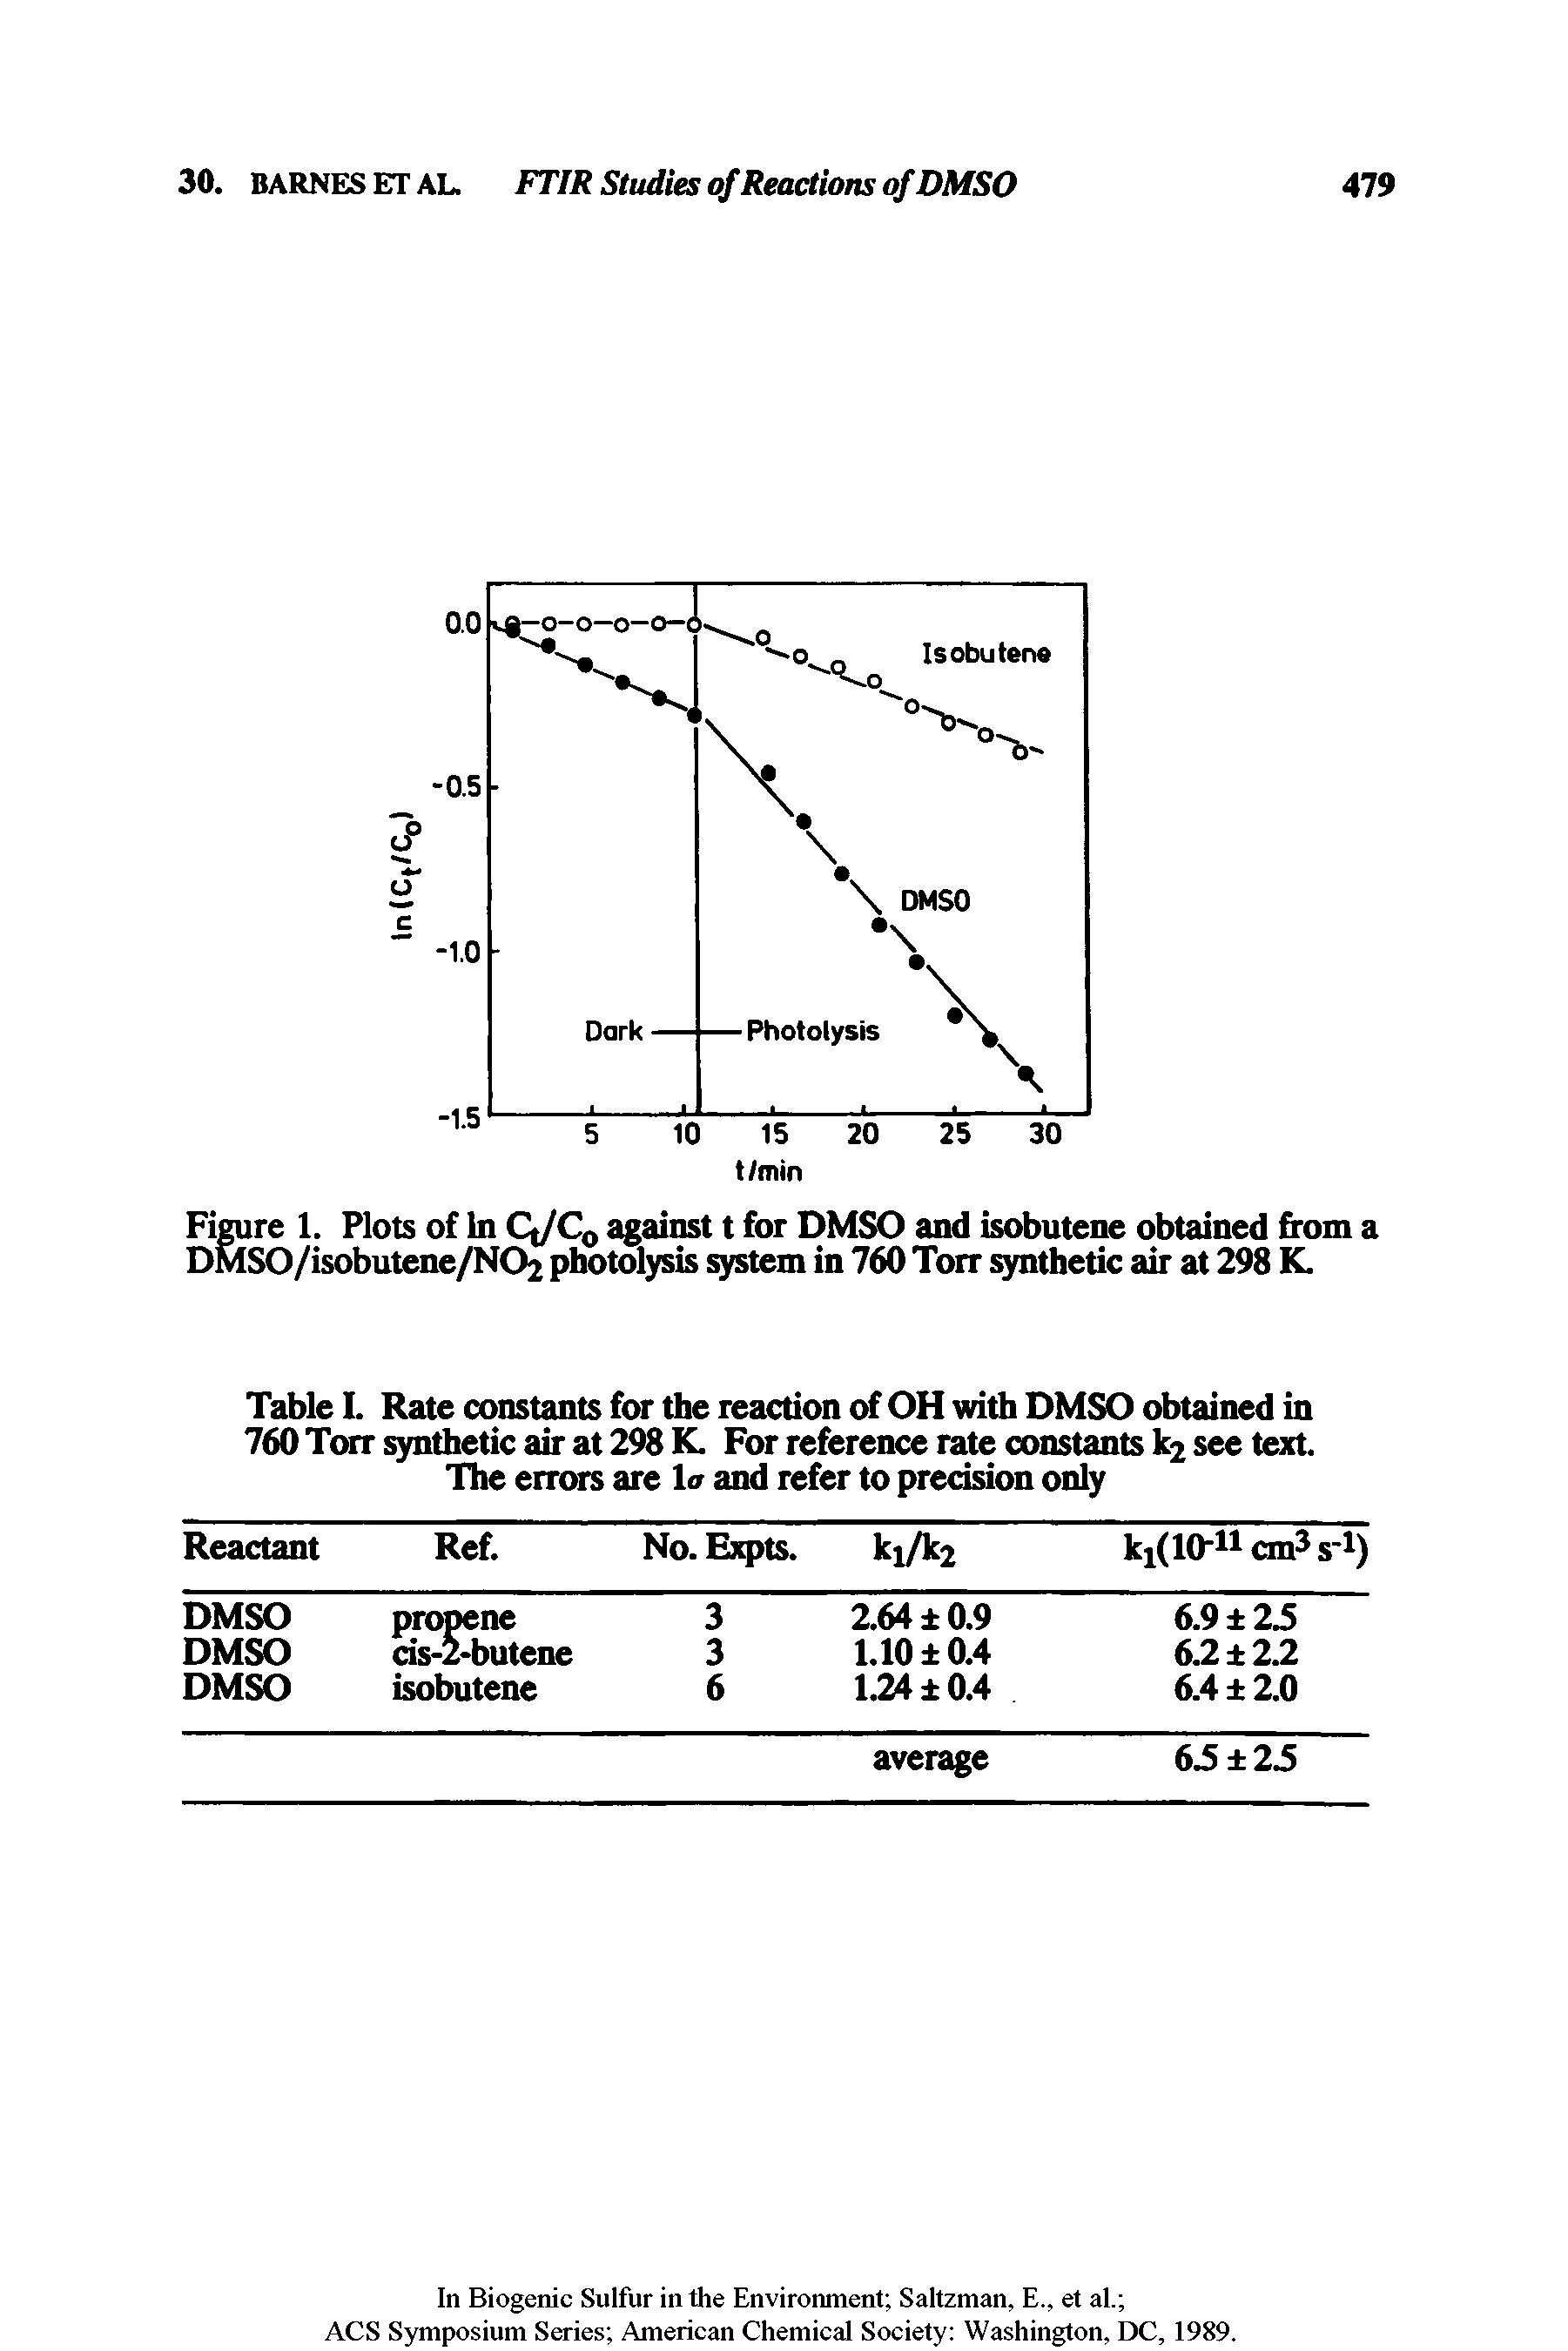 Table I. Rate constants for the reaction of OH with DMSO obtained in 760 Torr synthetic air at 298 K. For reference rate constants k2 see text. The errors are 1 a and refer to precision only...